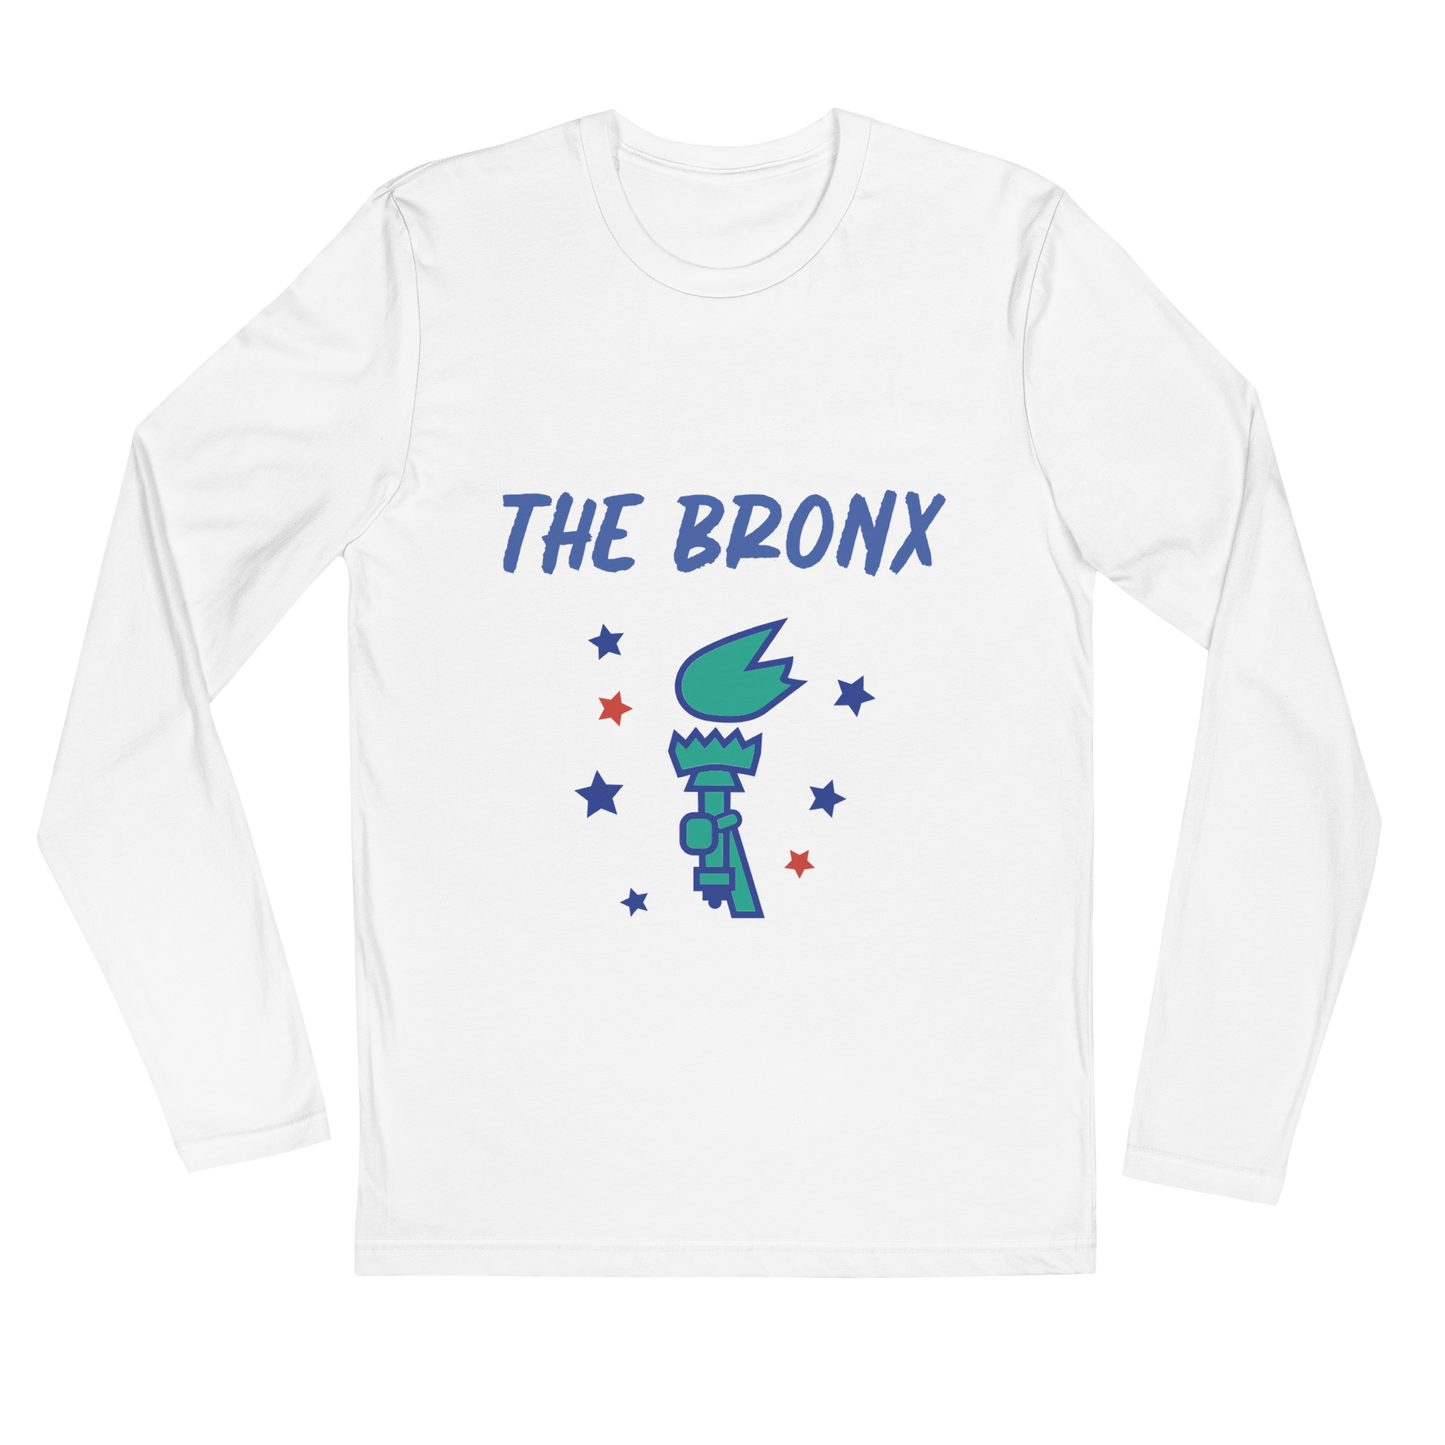 The Bronx Long Sleeve Fitted Crew